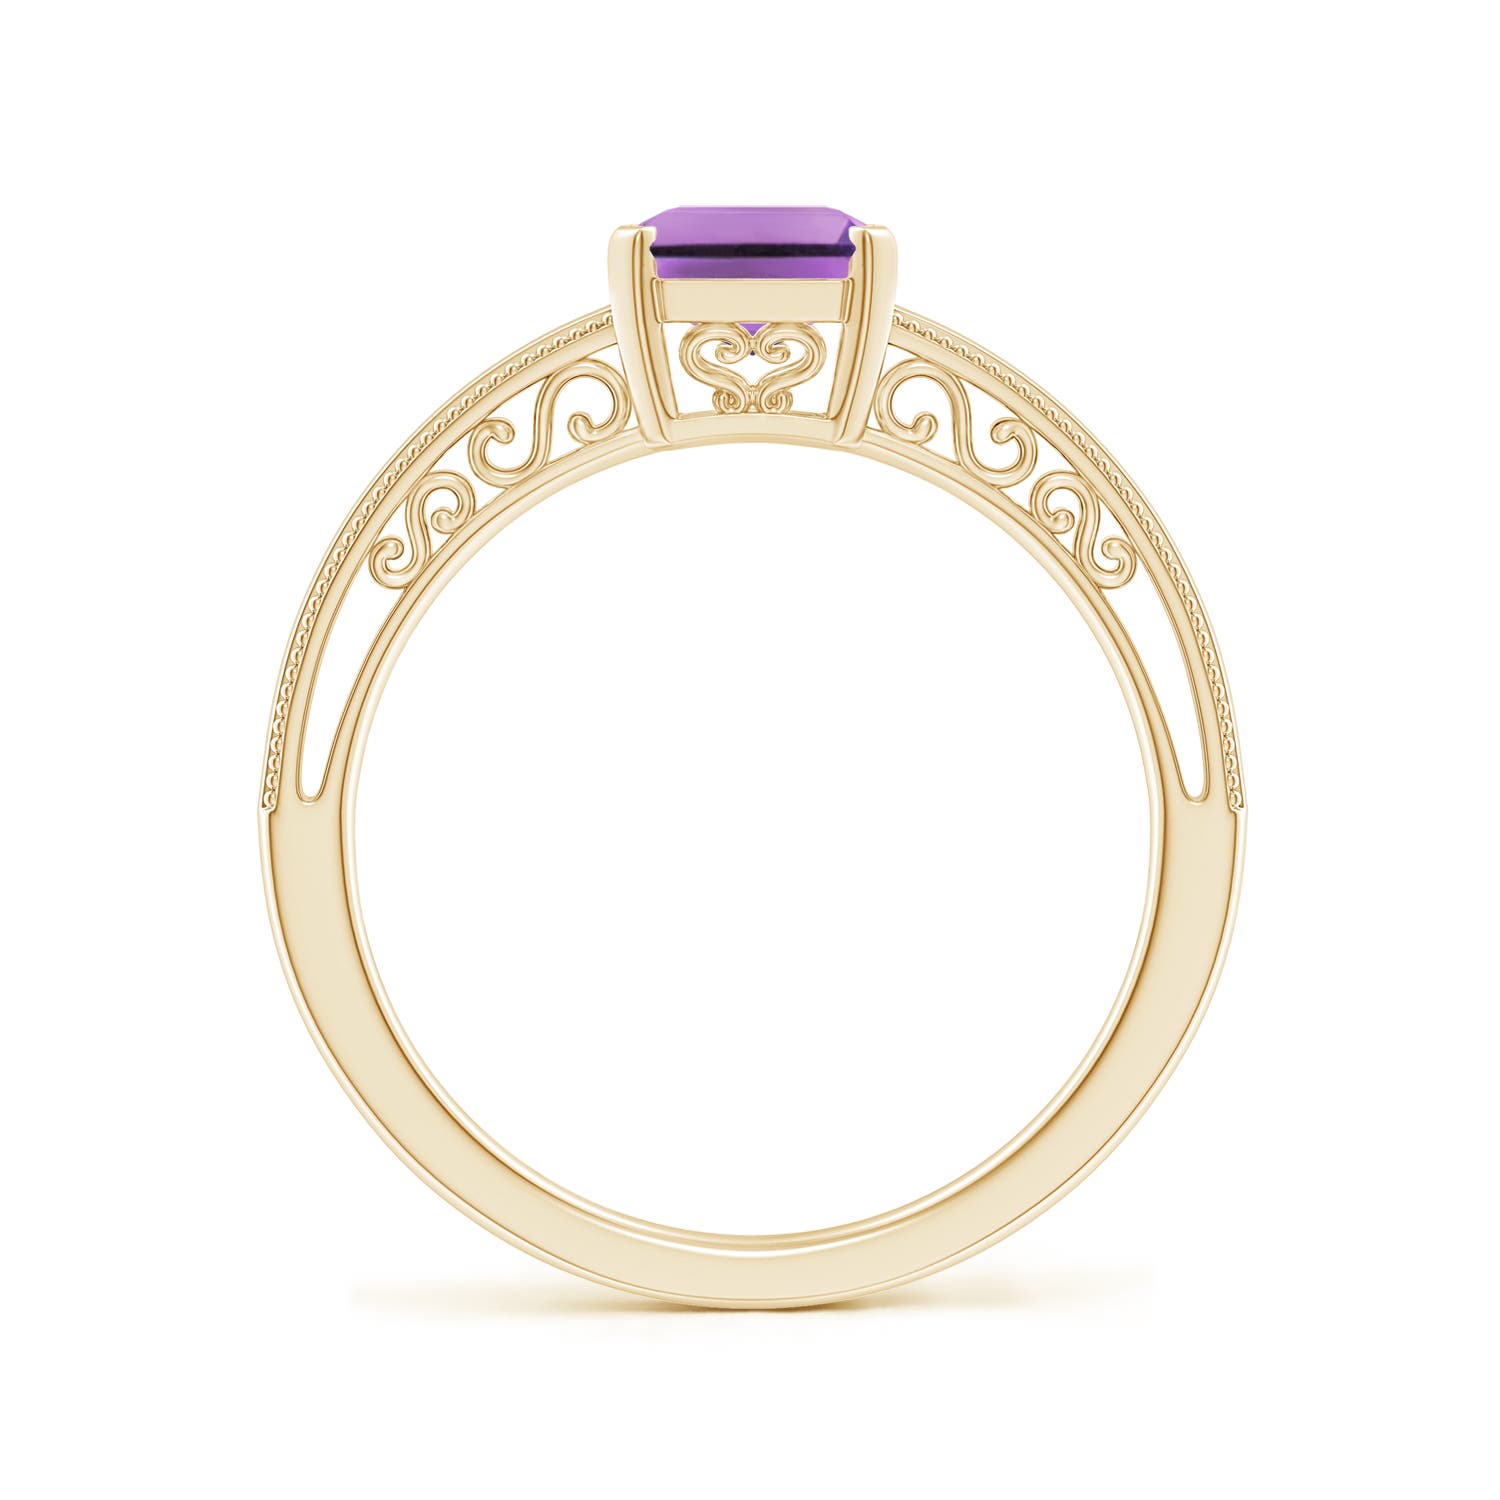 A - Amethyst / 1.5 CT / 14 KT Yellow Gold